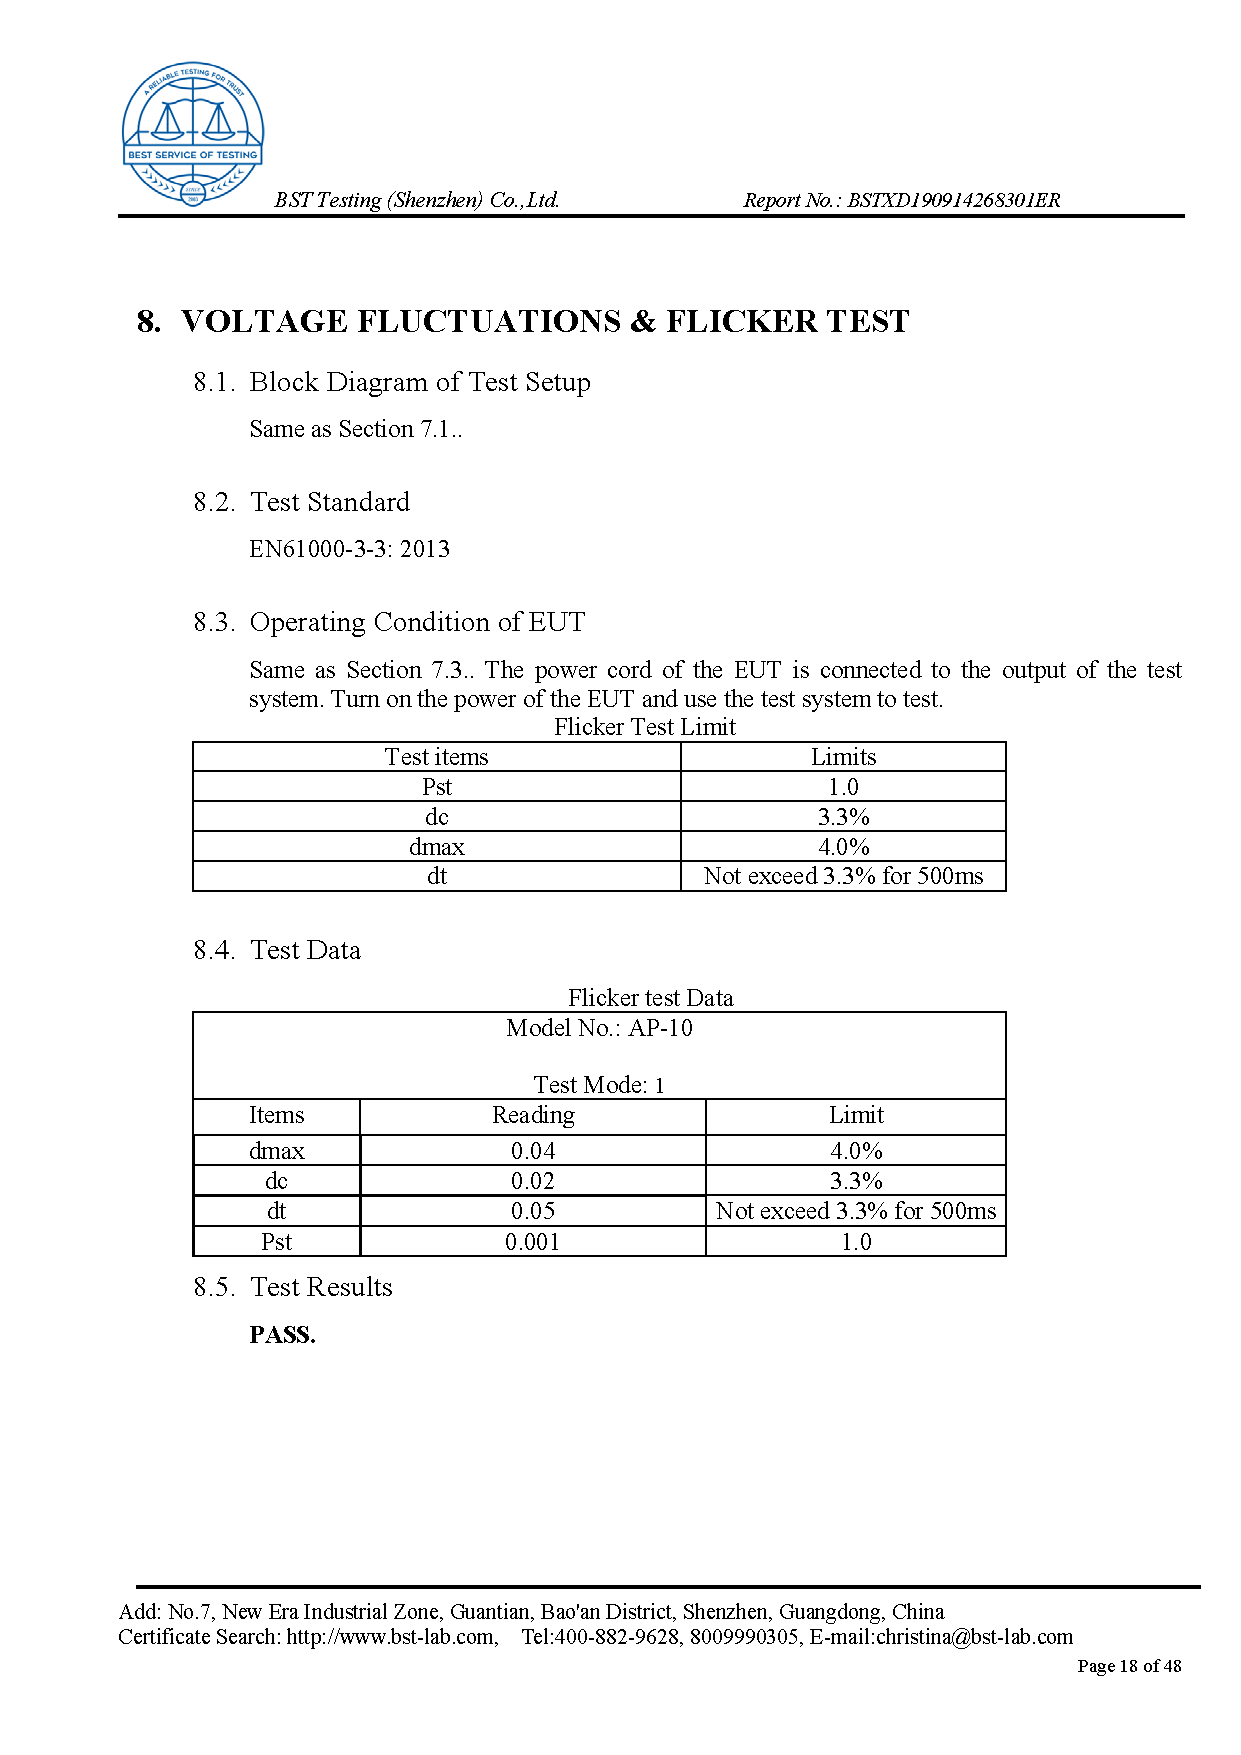 Ionic Refresher EMC Report Page 18